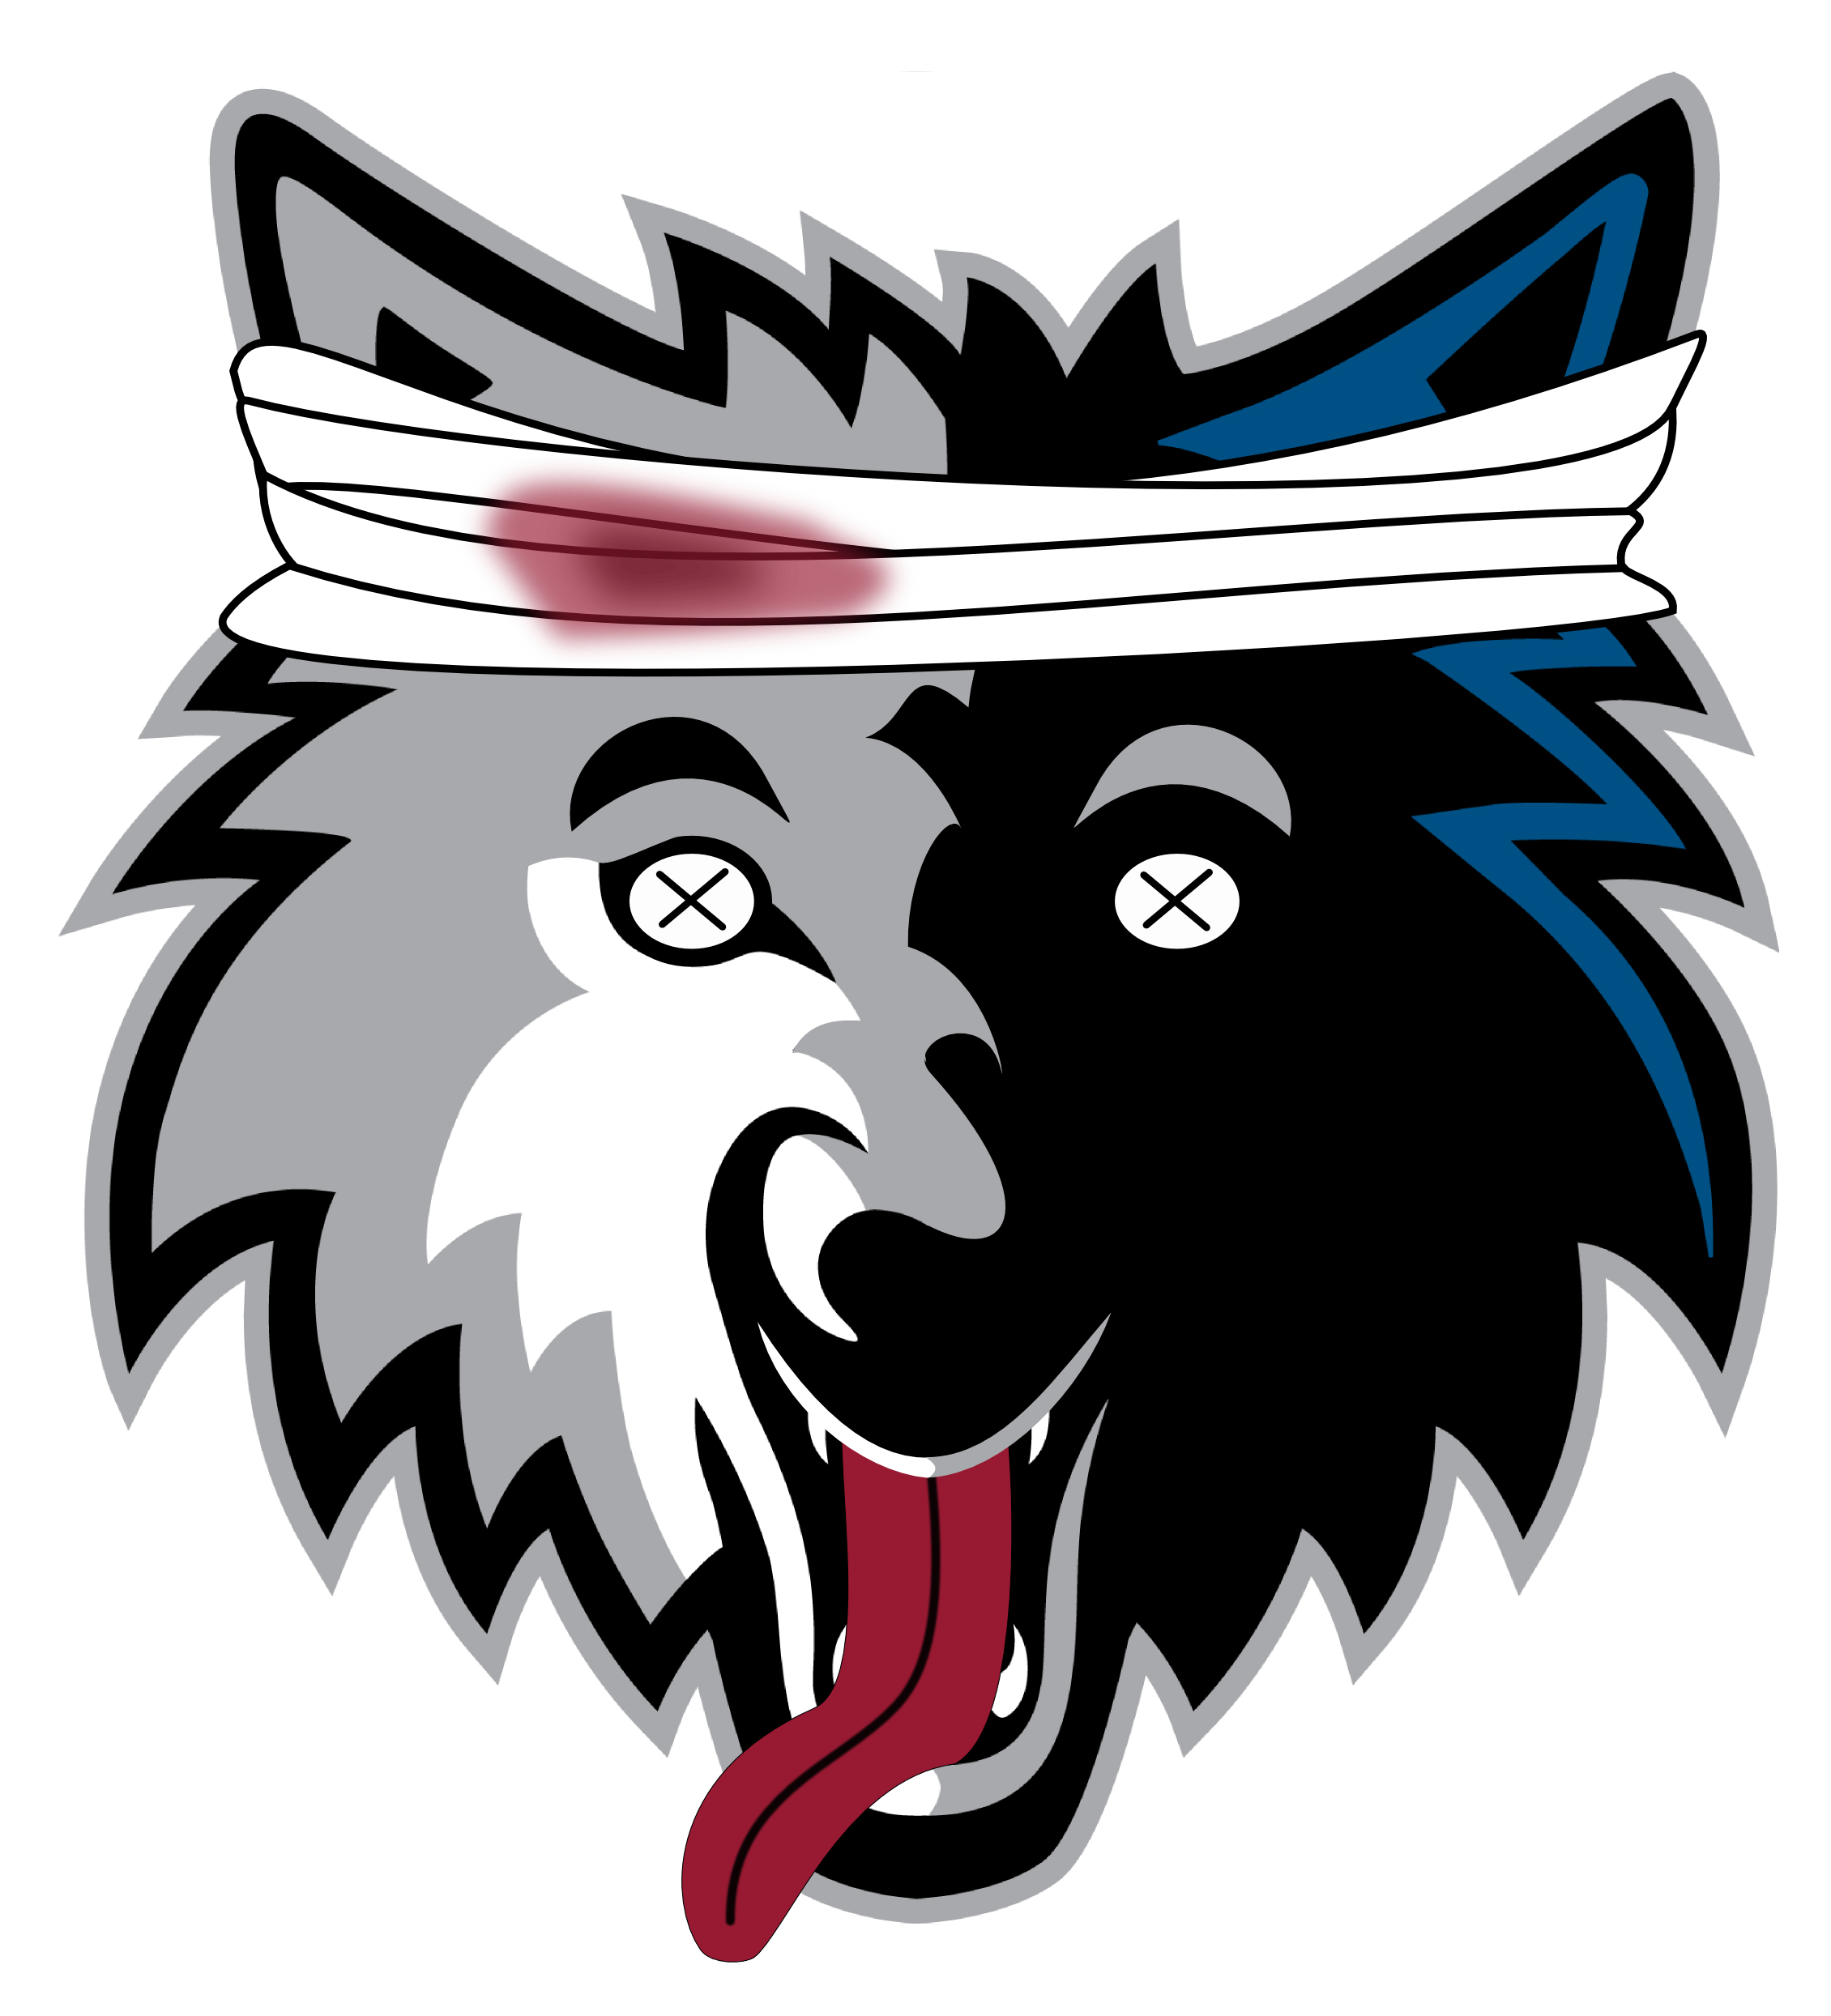 Twolves Logo - TIMBERWOLVES RELEASE NEW LOGO DESIGN WITH SEVEN GAMES LEFT IN TEAM'S ...